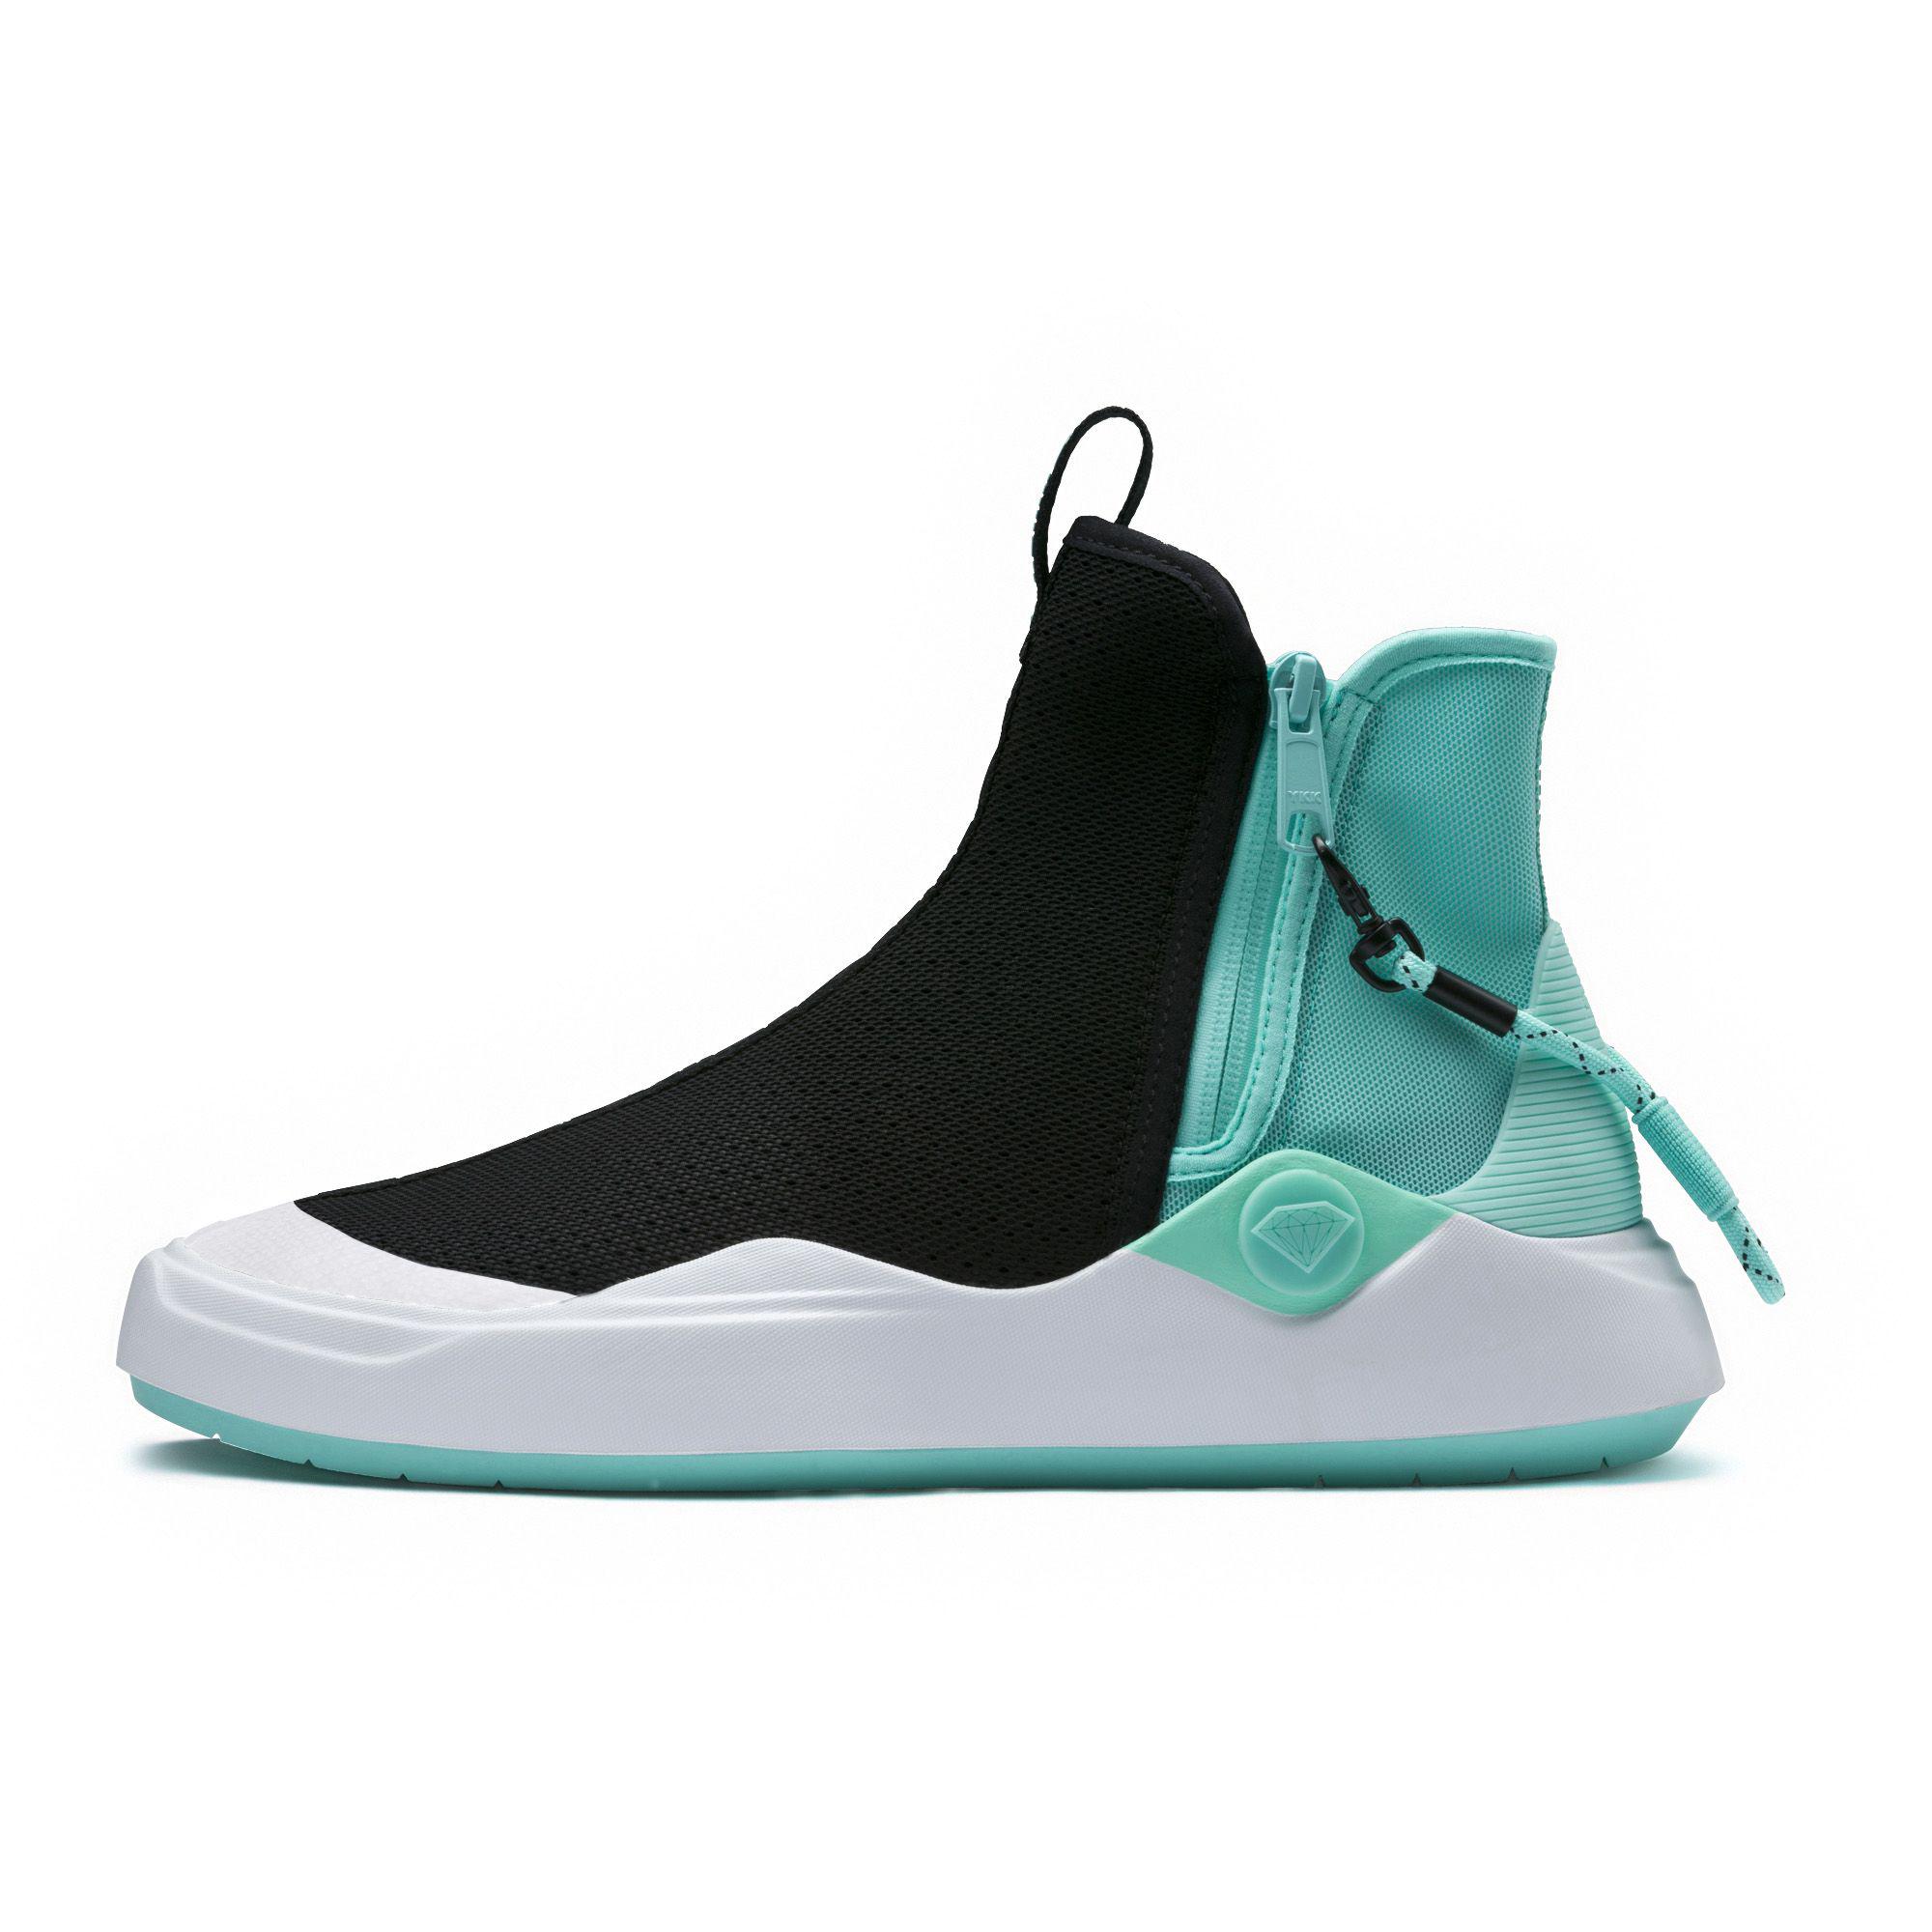 Lyst - Puma X Diamond Abyss Sneakers for Men